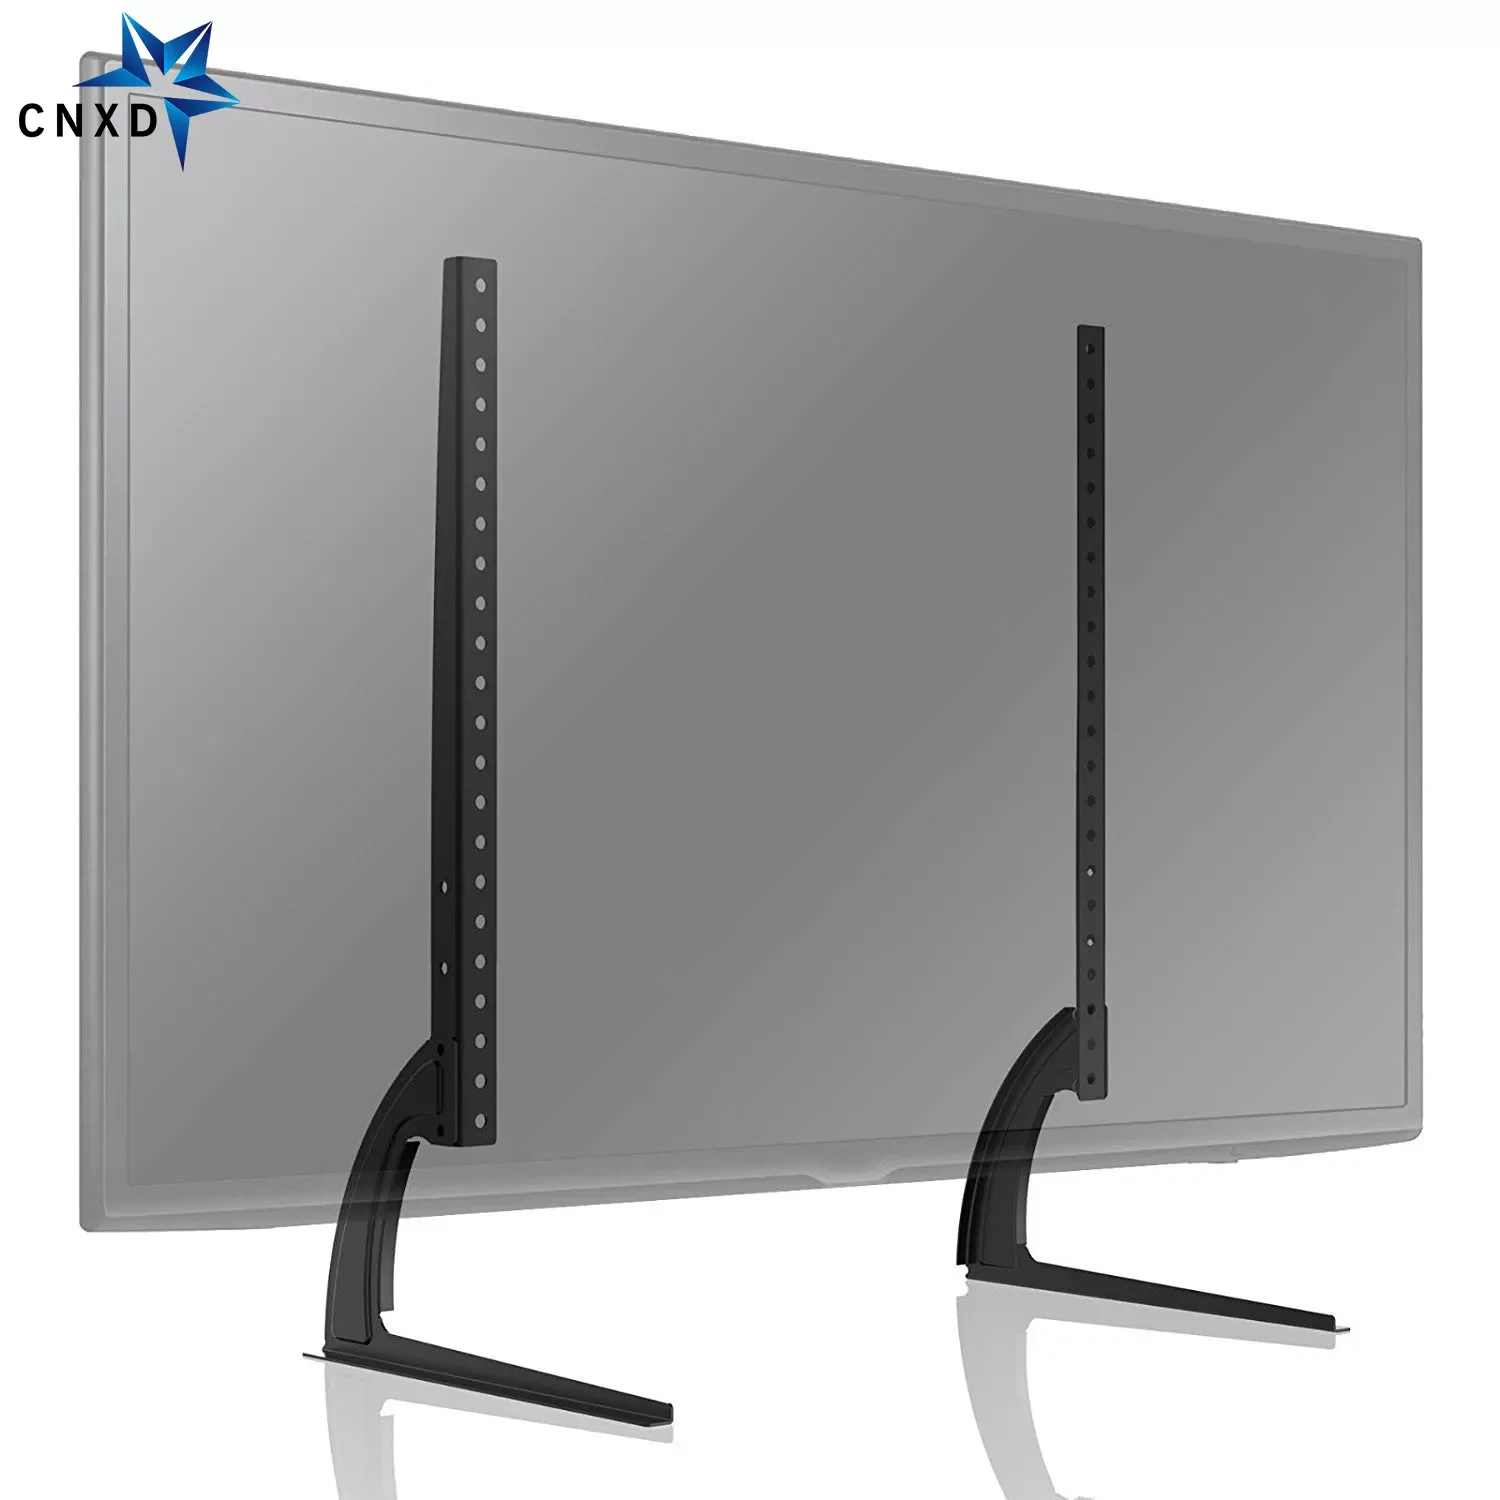 

Universal Table Top TV Monitor Stand Base with Height Adjustment fit 32-65" Flat Screen TV VESA up to 800x600mm 110Lbs Capa